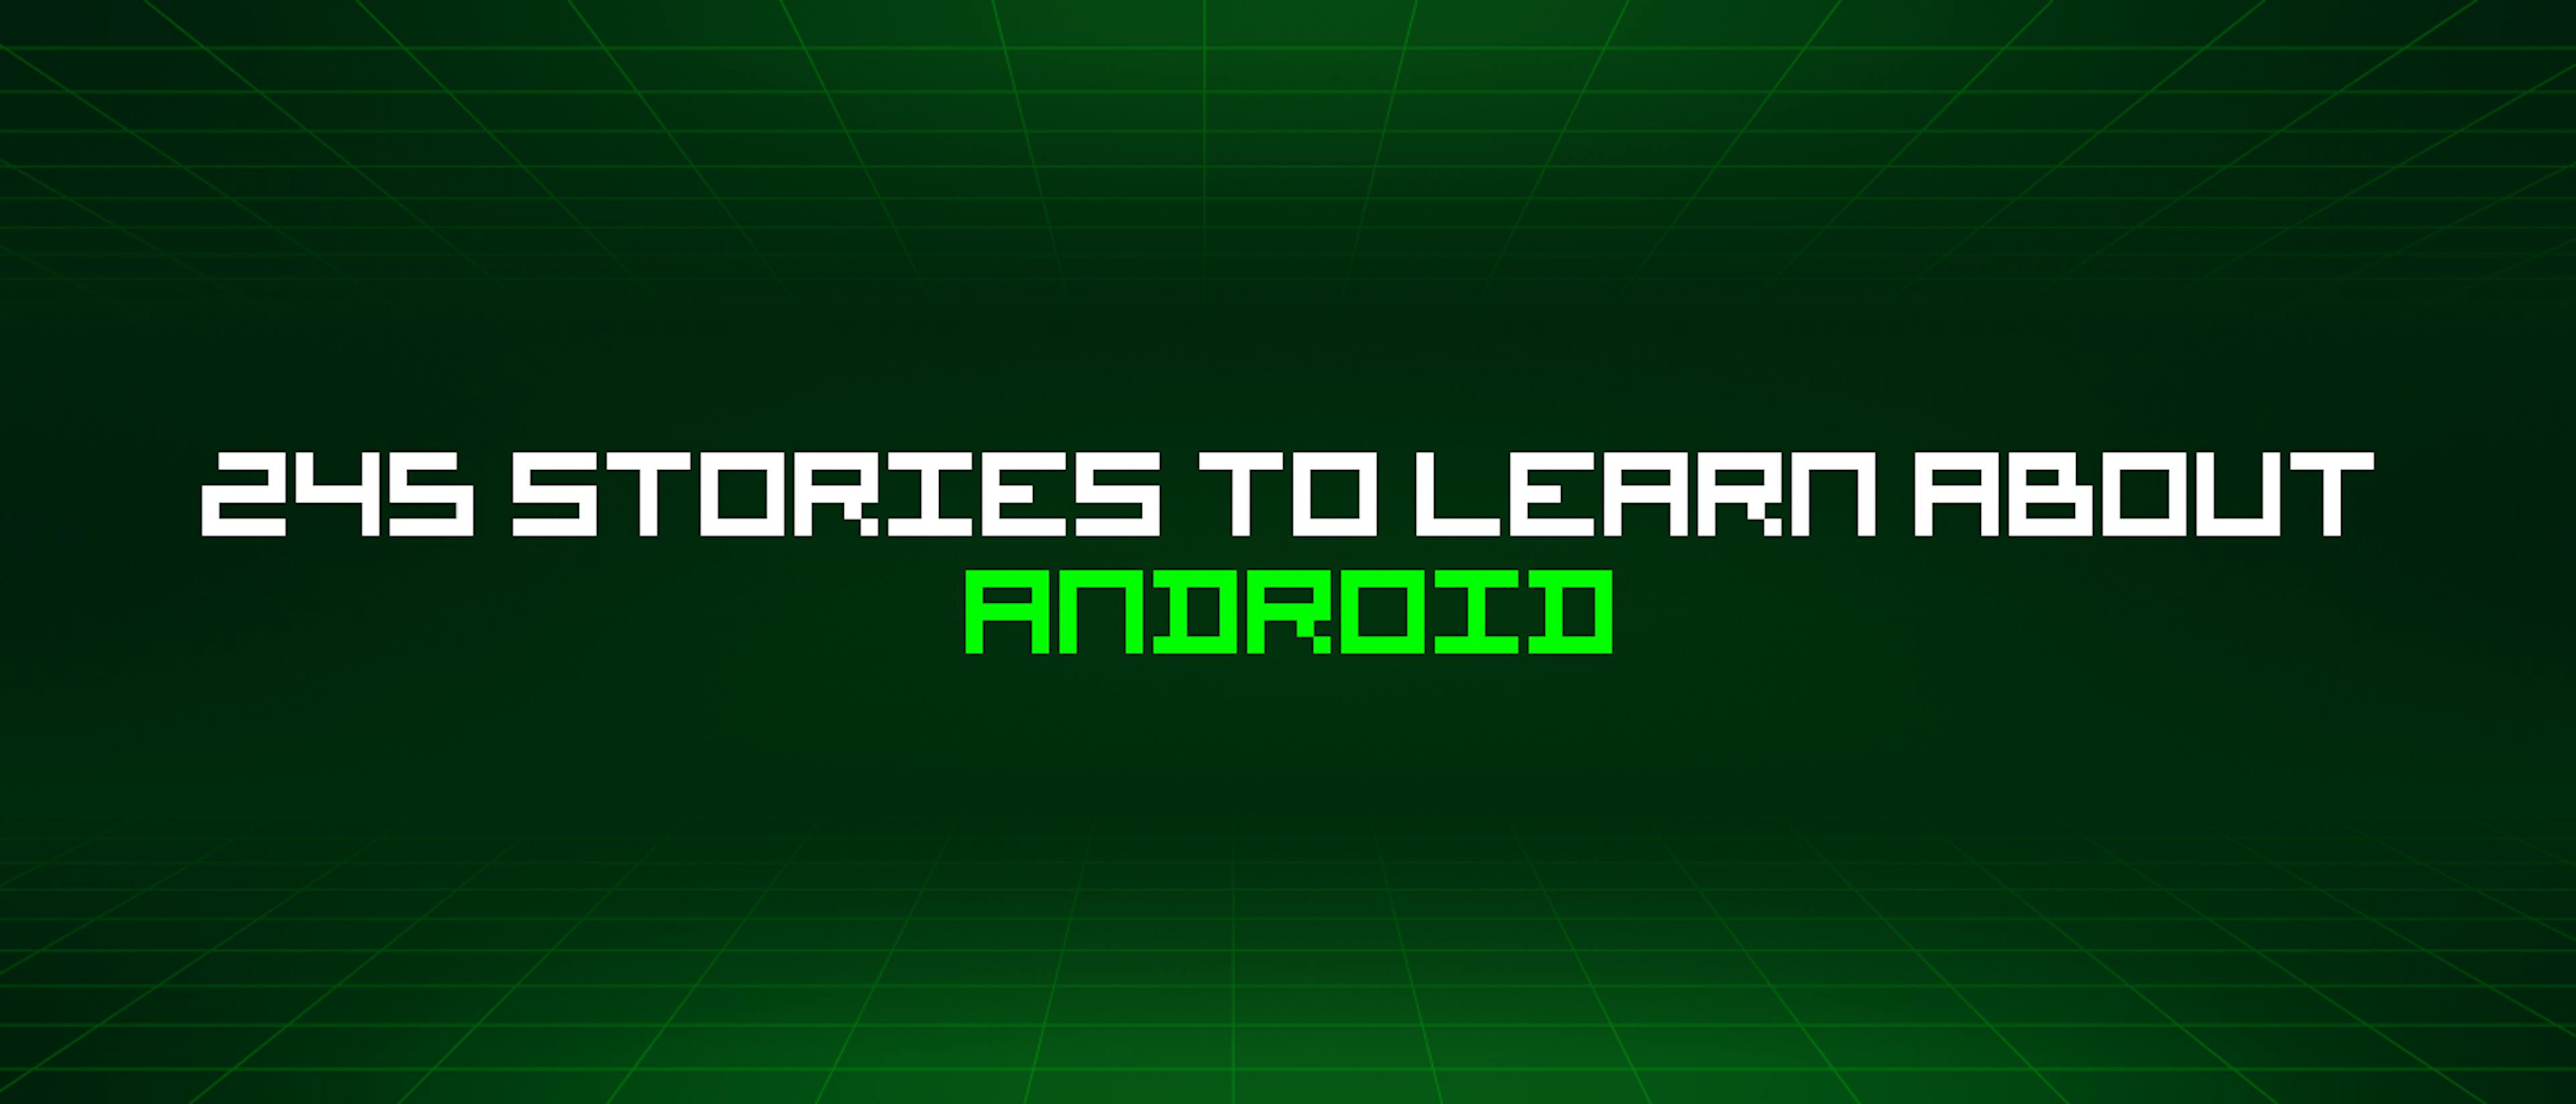 /245-stories-to-learn-about-android feature image